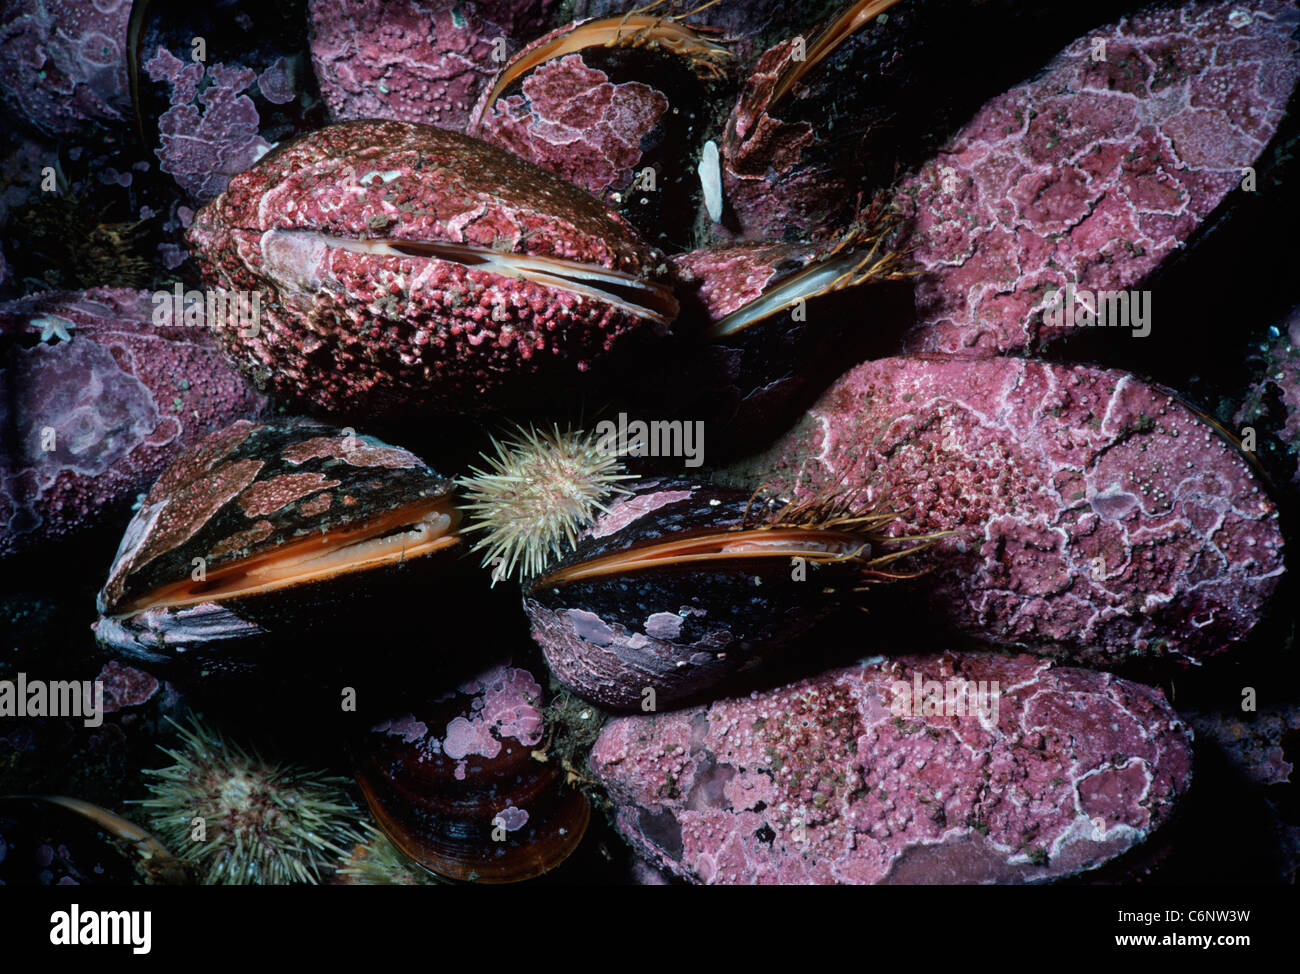 Horse Mussels (Modiolus modiolus) encrusted with Coralline Algae filter feeding on plankton. New England, North Atlantic Ocean Stock Photo